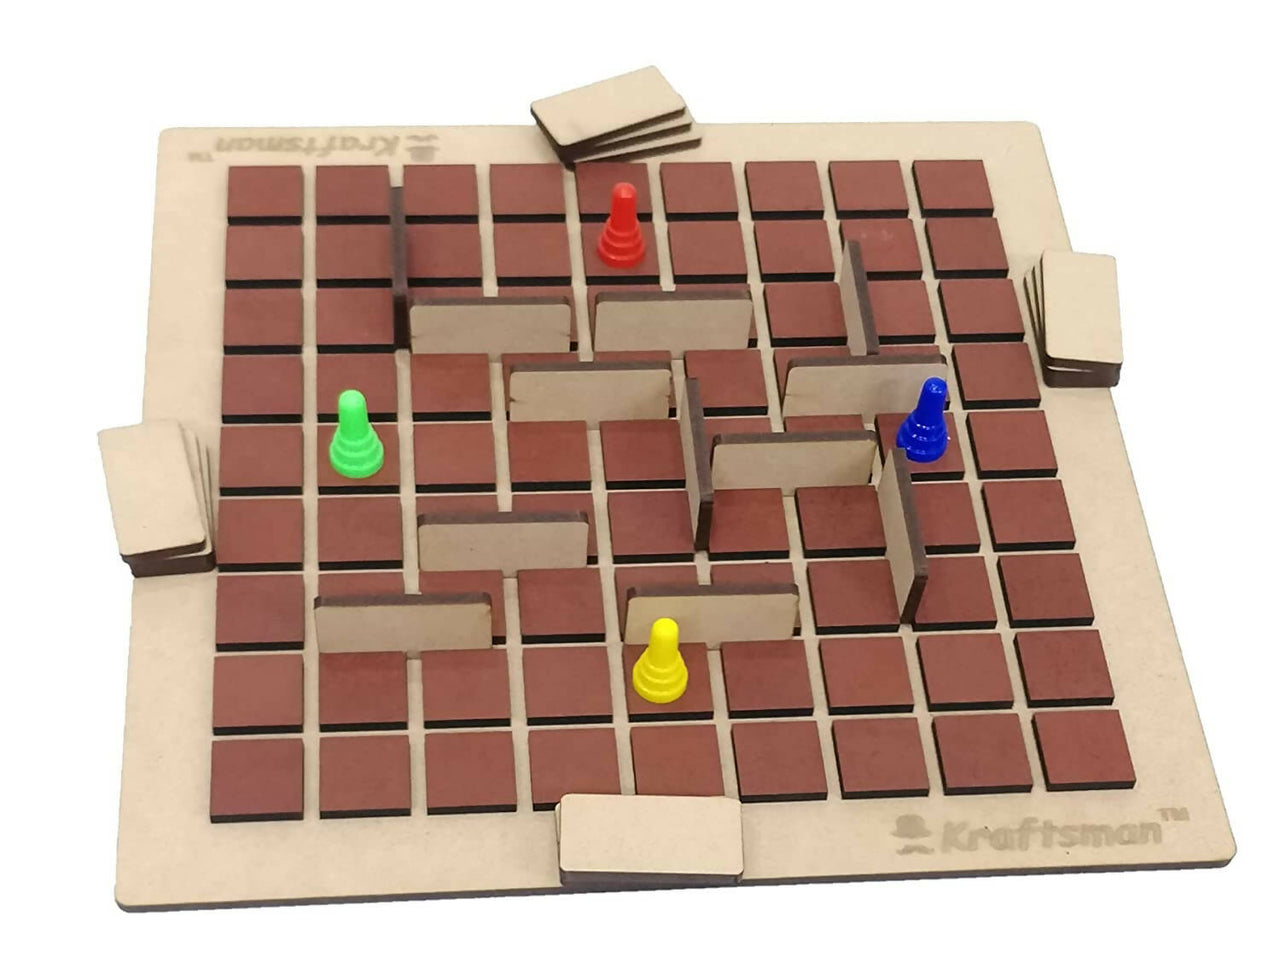 Kraftsman Wooden Corridor Board Game | 2-4 Players Board Game for All Age Groups - Distacart